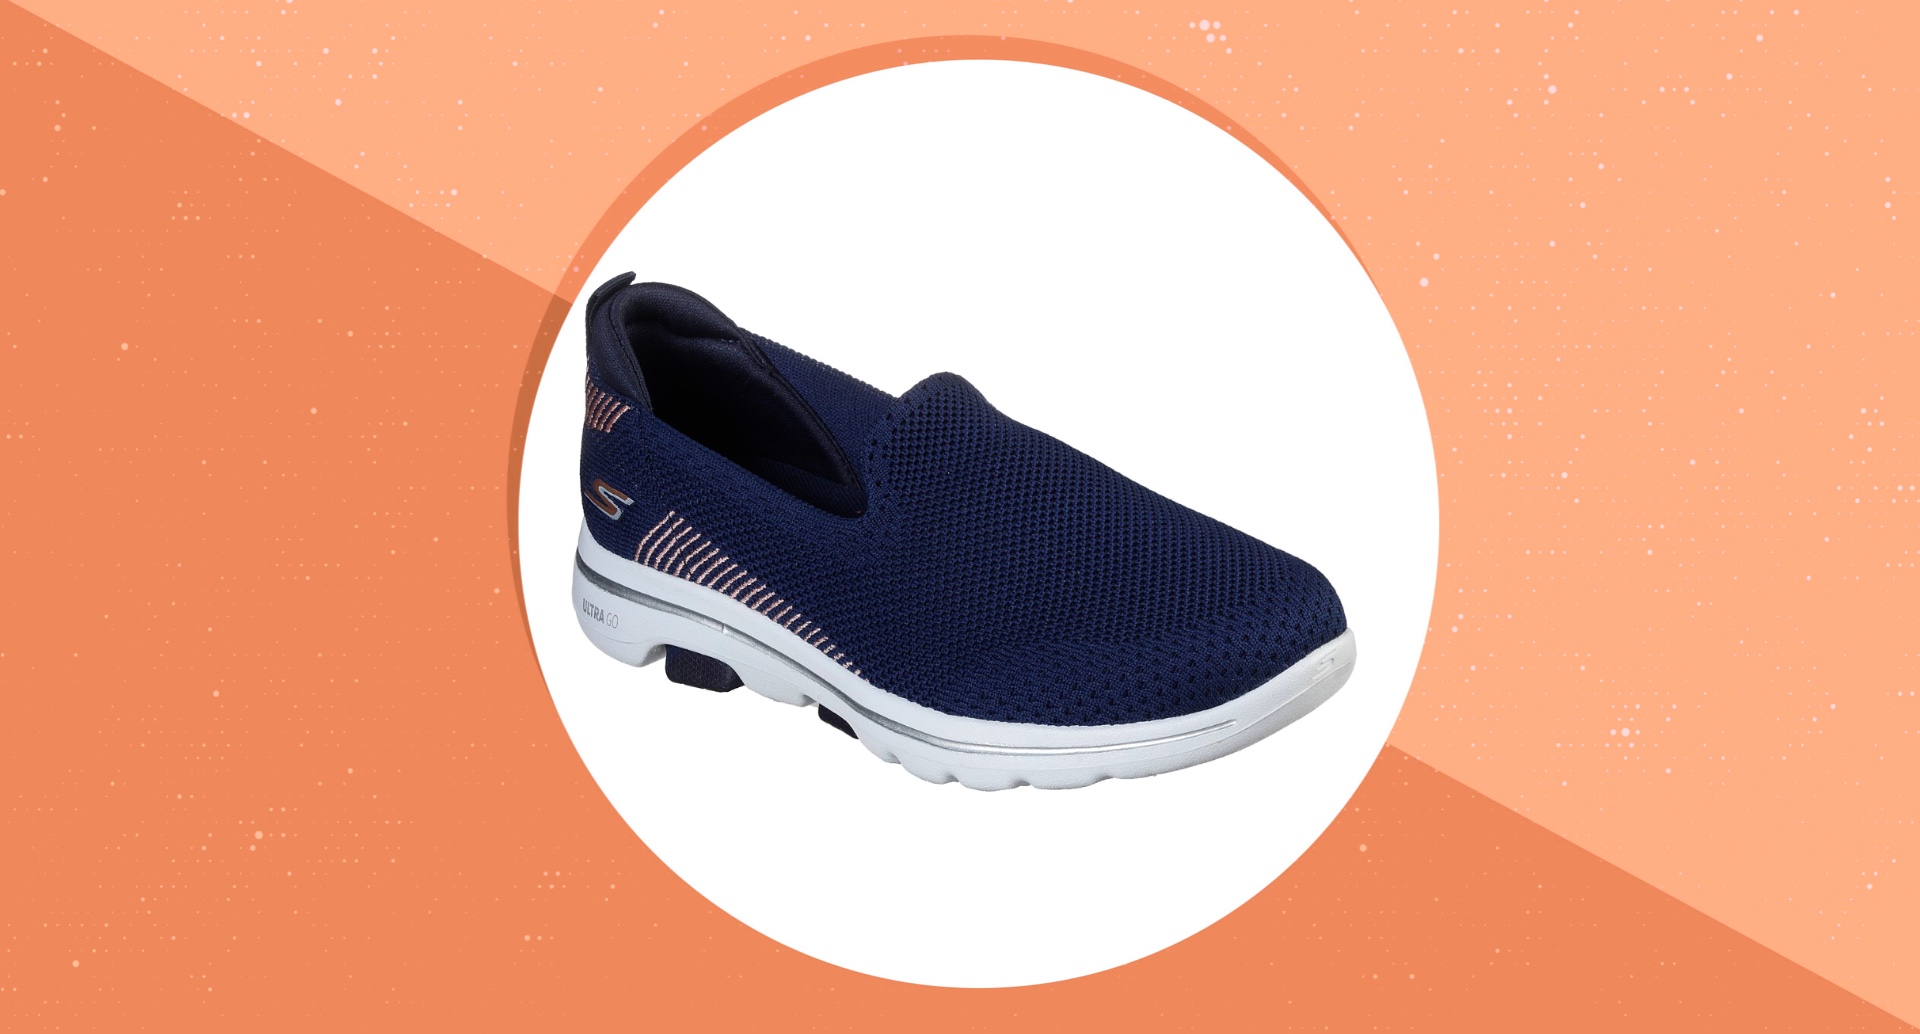 Skechers GoWalk 5 shoes are perfect for 